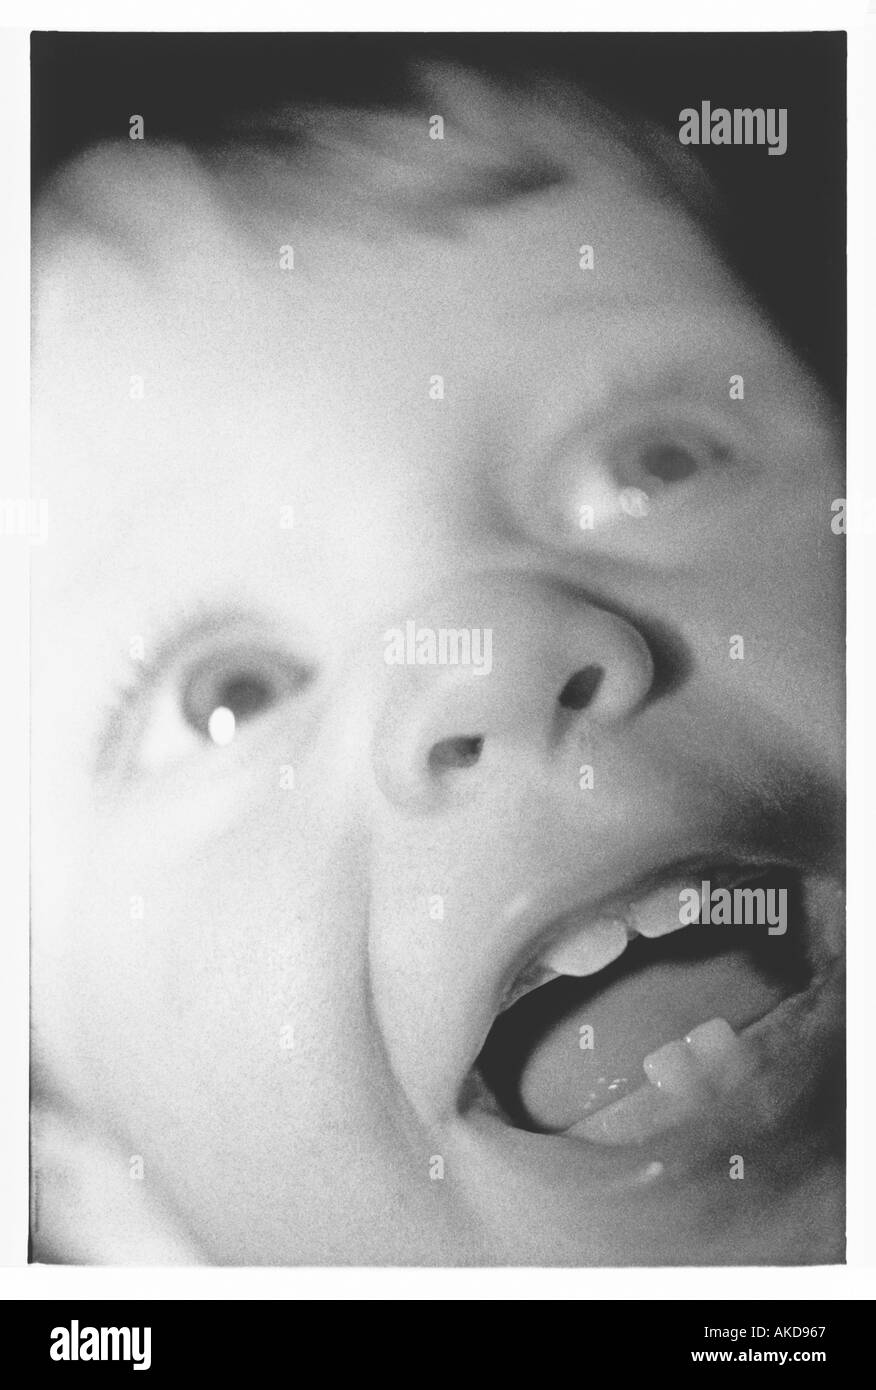 BOY BABY FACE SMILING CLOSEUP 1 Part of series Stock Photo